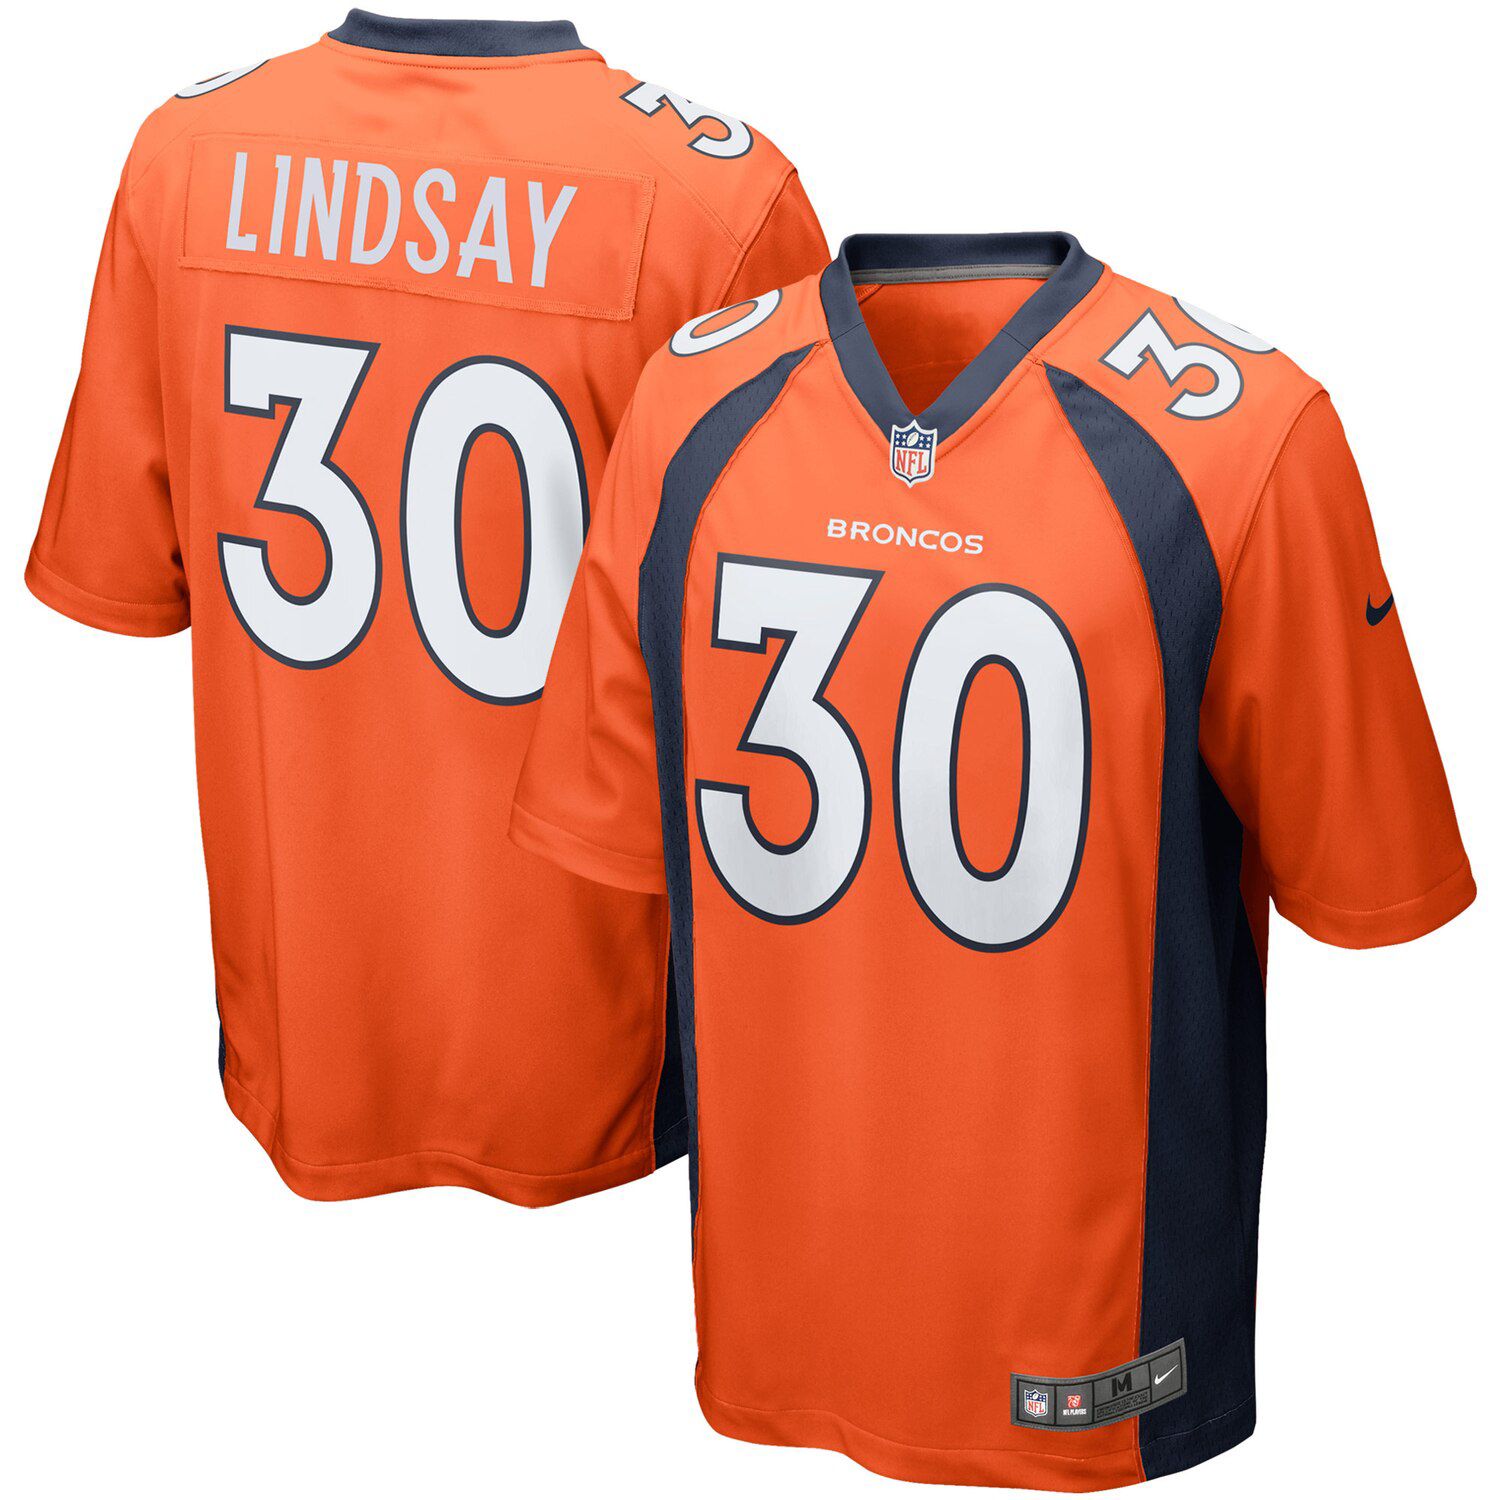 phillip lindsay authentic jersey